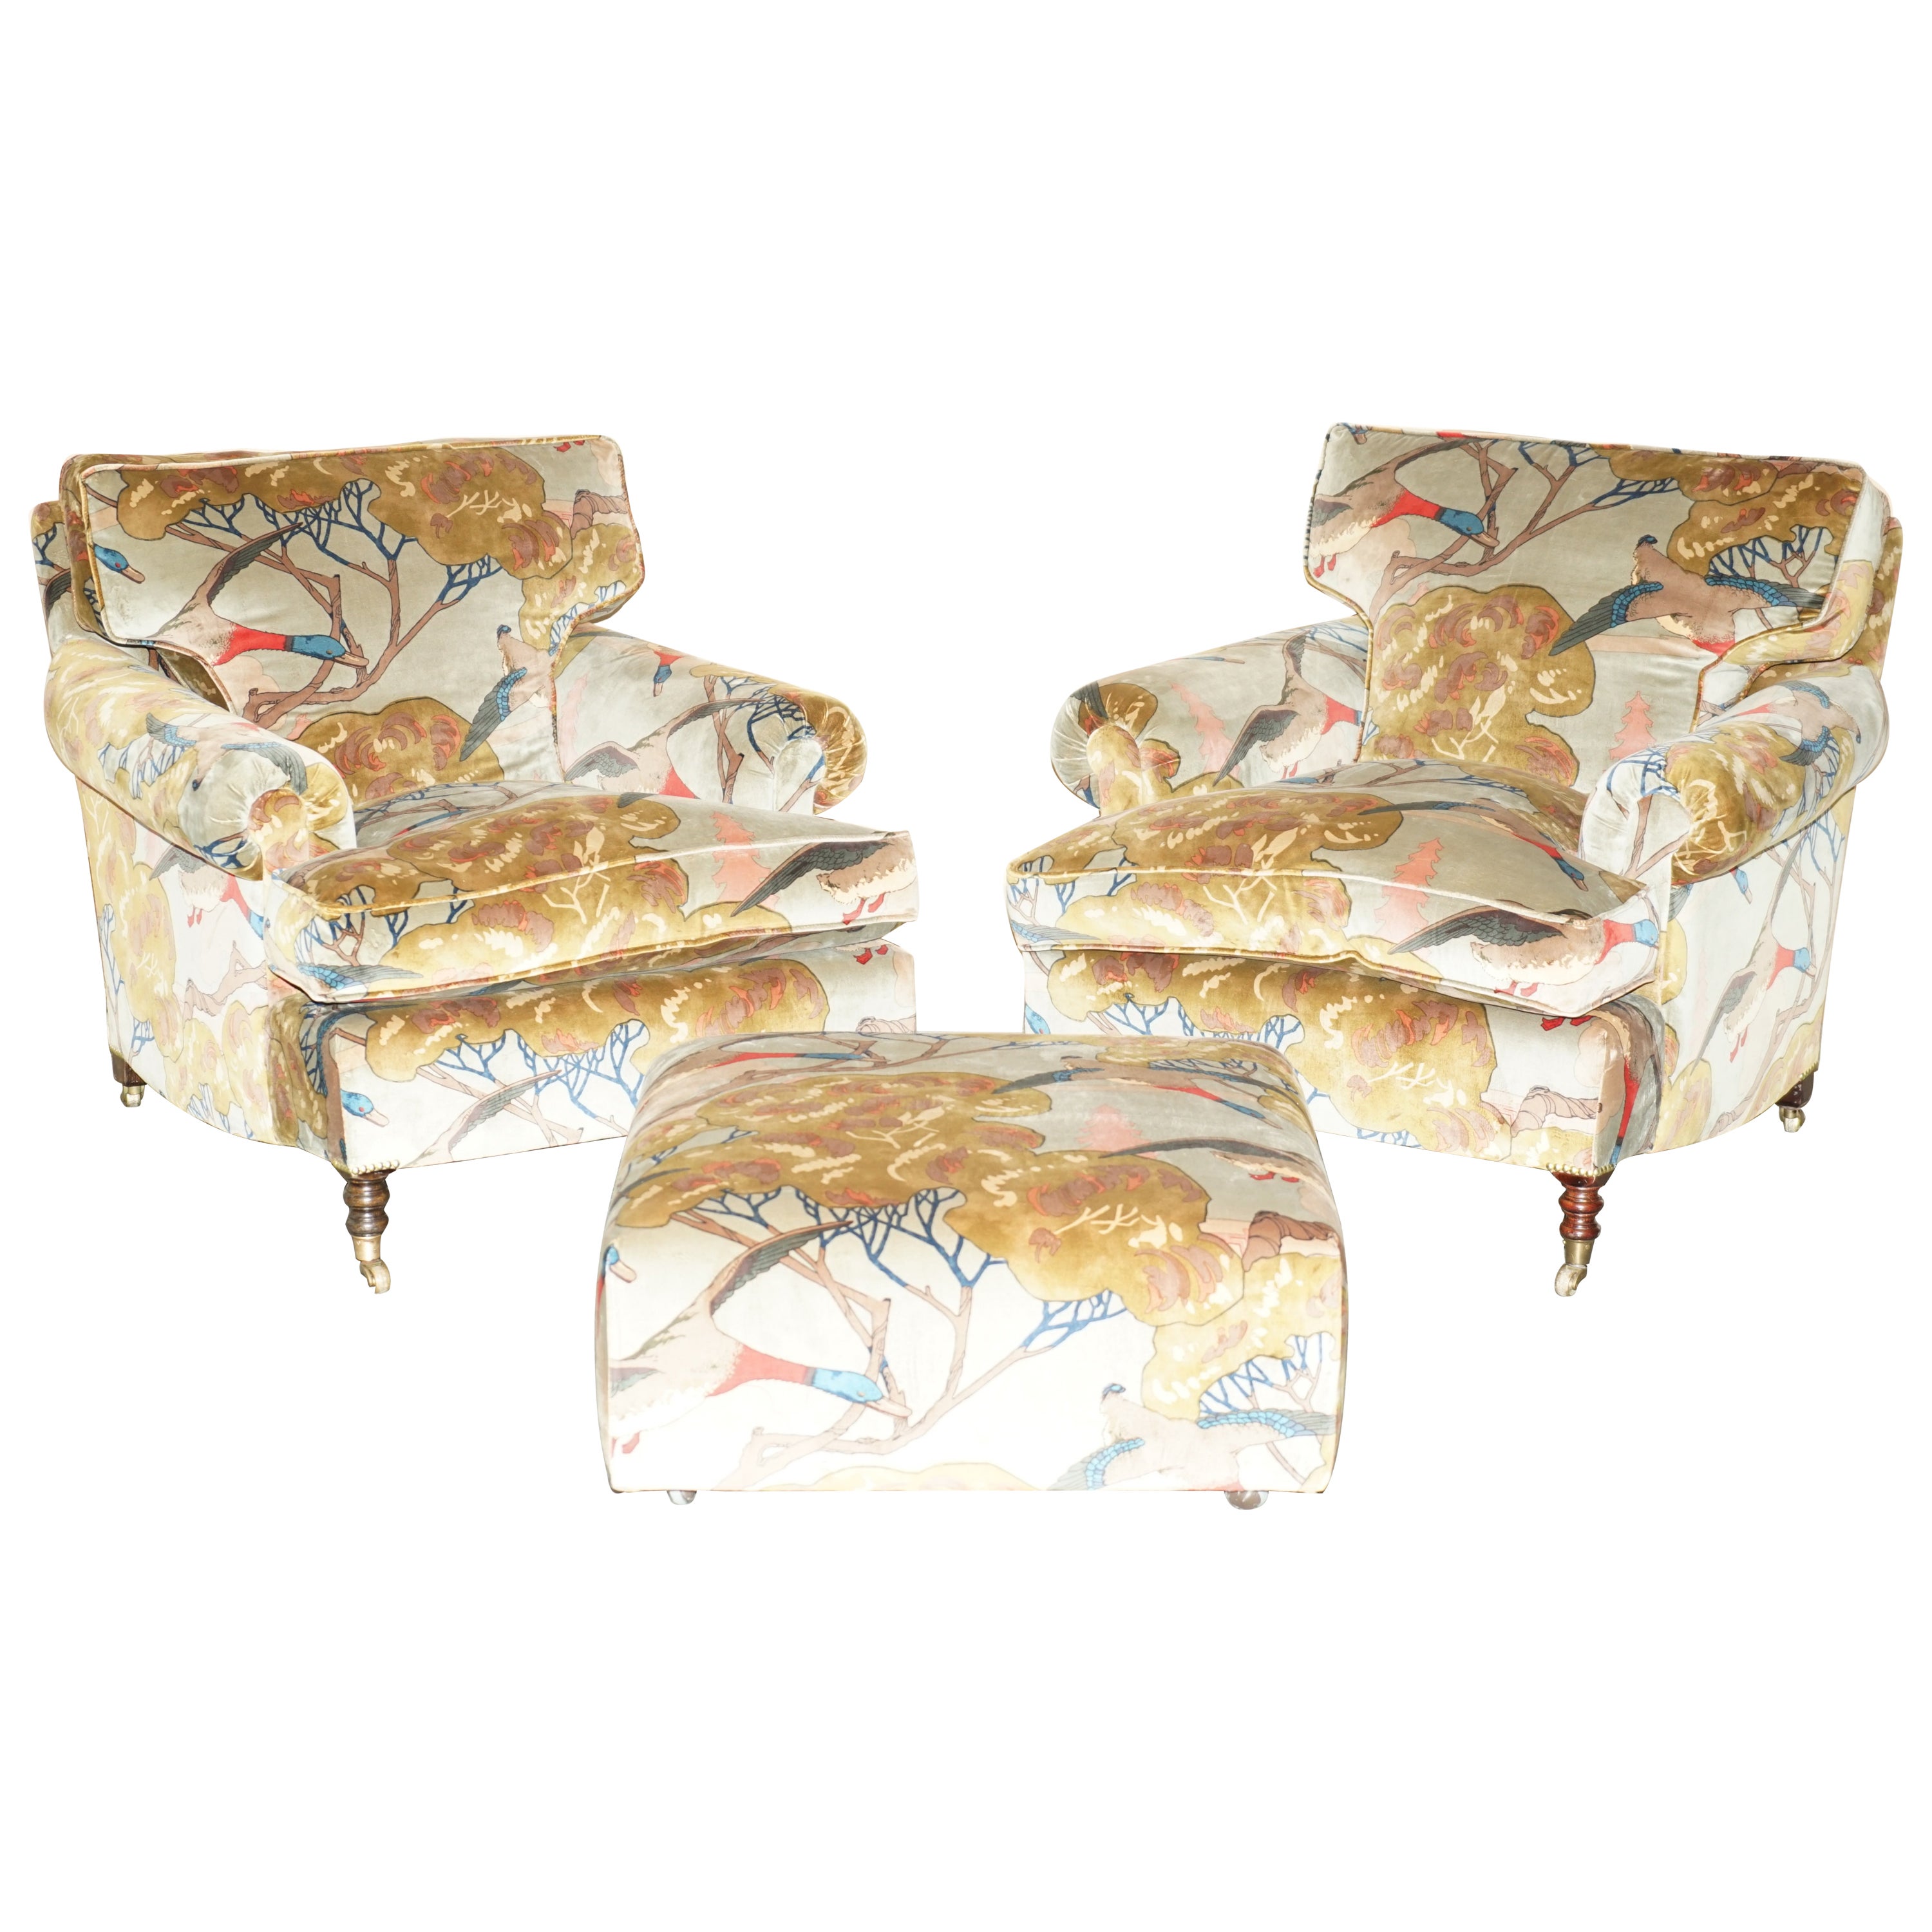 New Pair of George Smith Flying Ducks Armchairs & Ottoman Footstool For Sale